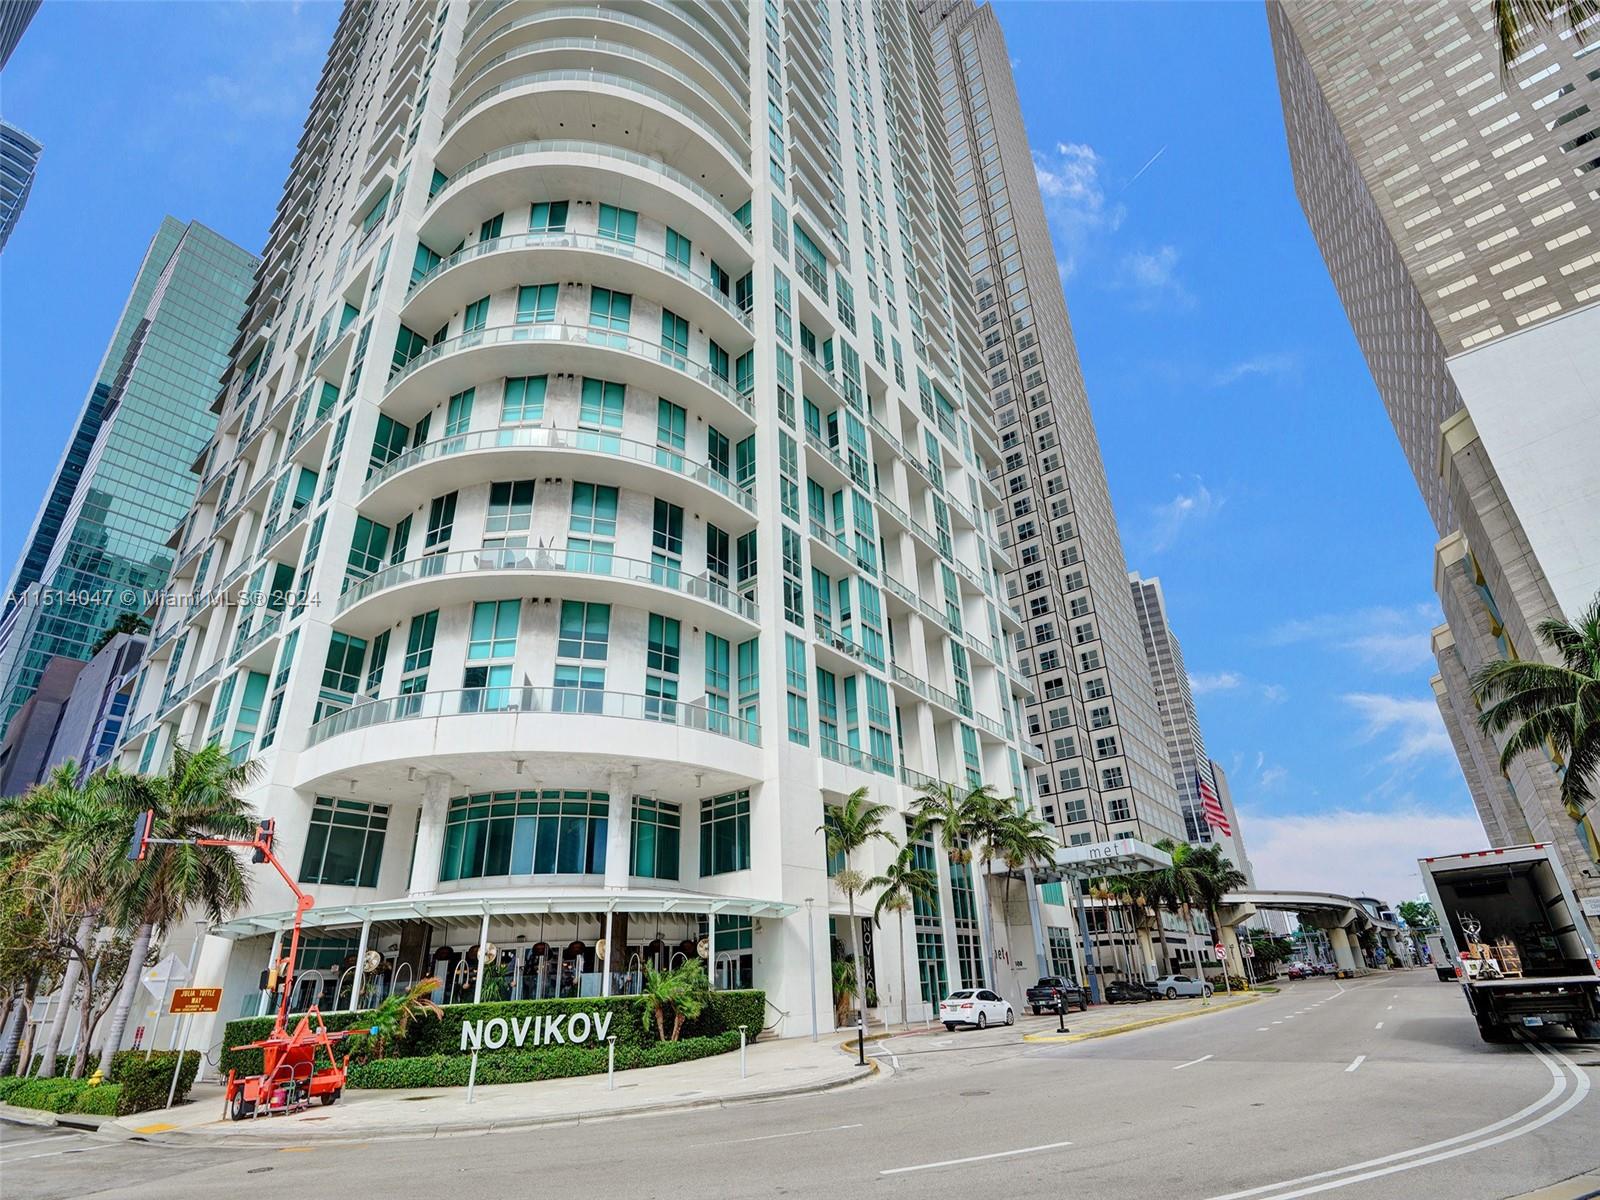 Remodeled, split BR floorplan Corner unit at Met 1.  Located in Southern Downtown Miami.  One block from Whole Foods market, Silverspot Cinema & pedestrian friendly Brickell bridge.  Very short walk to Bayfront park, shopping and many restaurants/cafes to choose from.  This corner unit upgrades include Real Bamboo hardwood grey floors. Newer kitchen w/ White Quartz countertops.  Waterfall edge w/ lots of extra storage space.  Built out closets & extra cabinetry, window shades and one fully remodeled bathroom.  Other recent appliance upgrades include: LG ThinQ fridge w/ see thru door, Bosch 1 yr old AC, Water Heater, Washer & Dryer.  
The unit comes w/ an external Storage cage, 1 parking space & HOA includes cable/internet.  Large gym, kids room, business. center, sauna and much more.